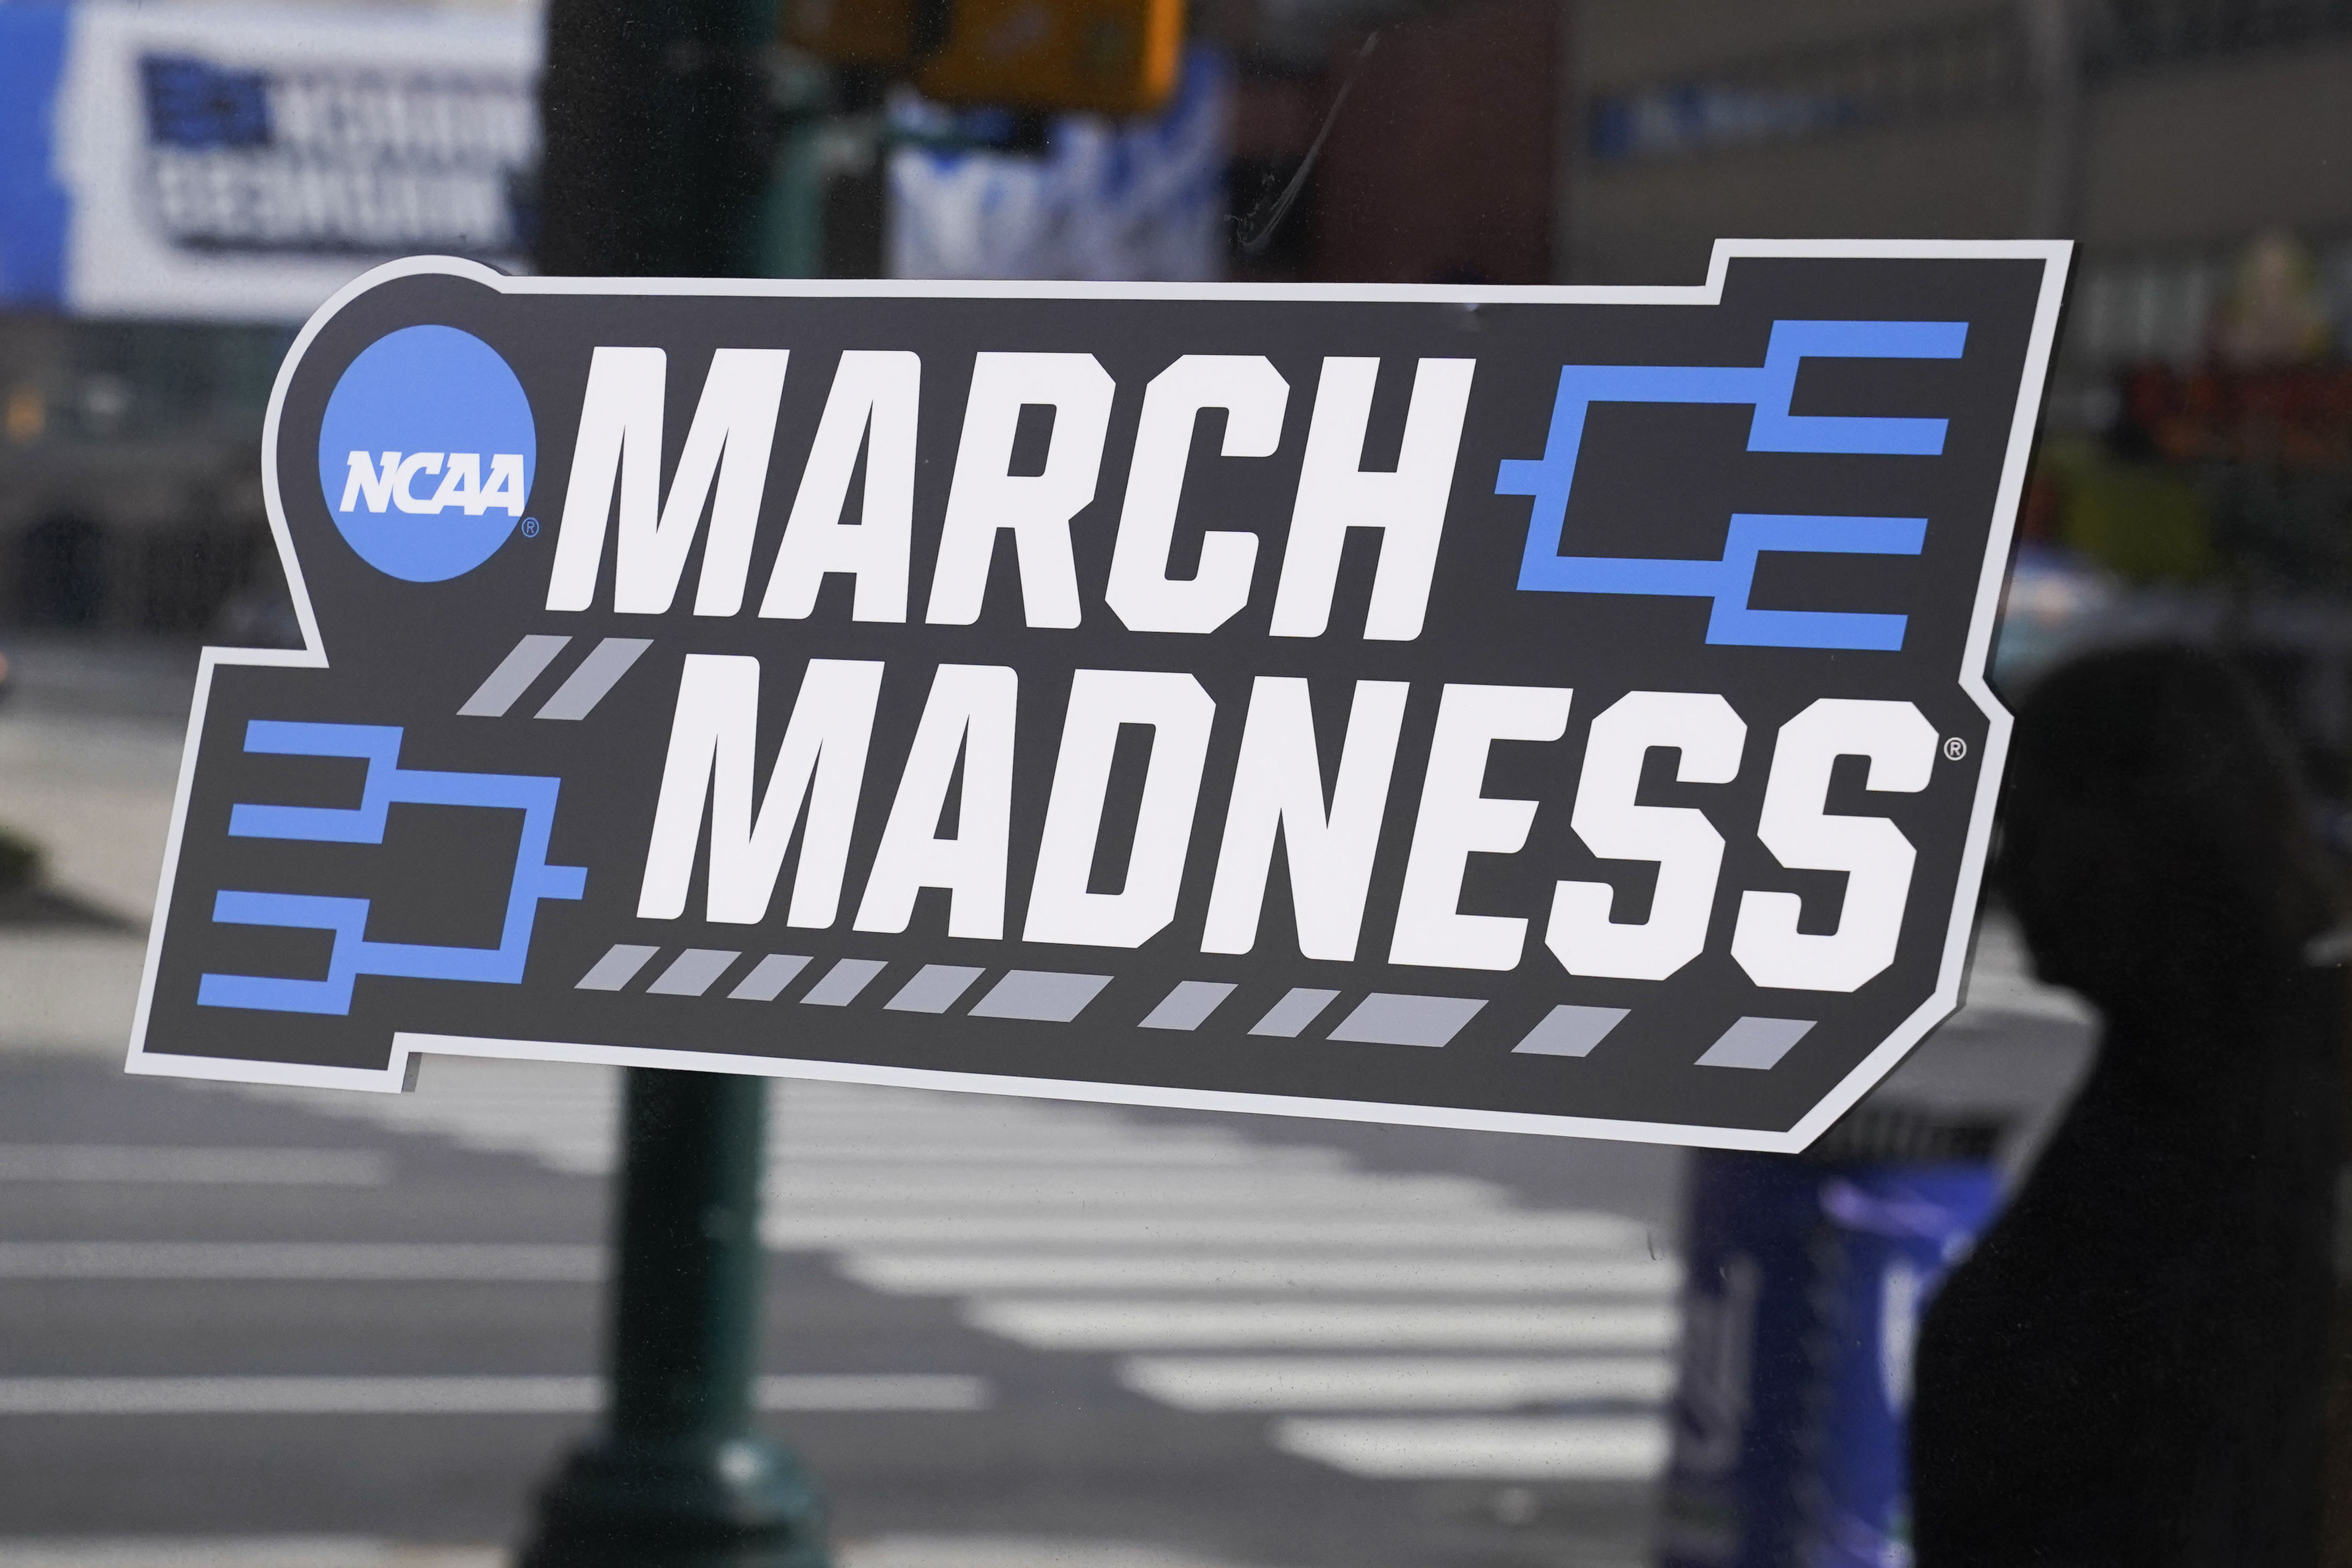 March Madness 2021 Live stream, TV schedule, how to watch Round 1, Day 1 of NCAA Tournament basketball (Fri., Mar